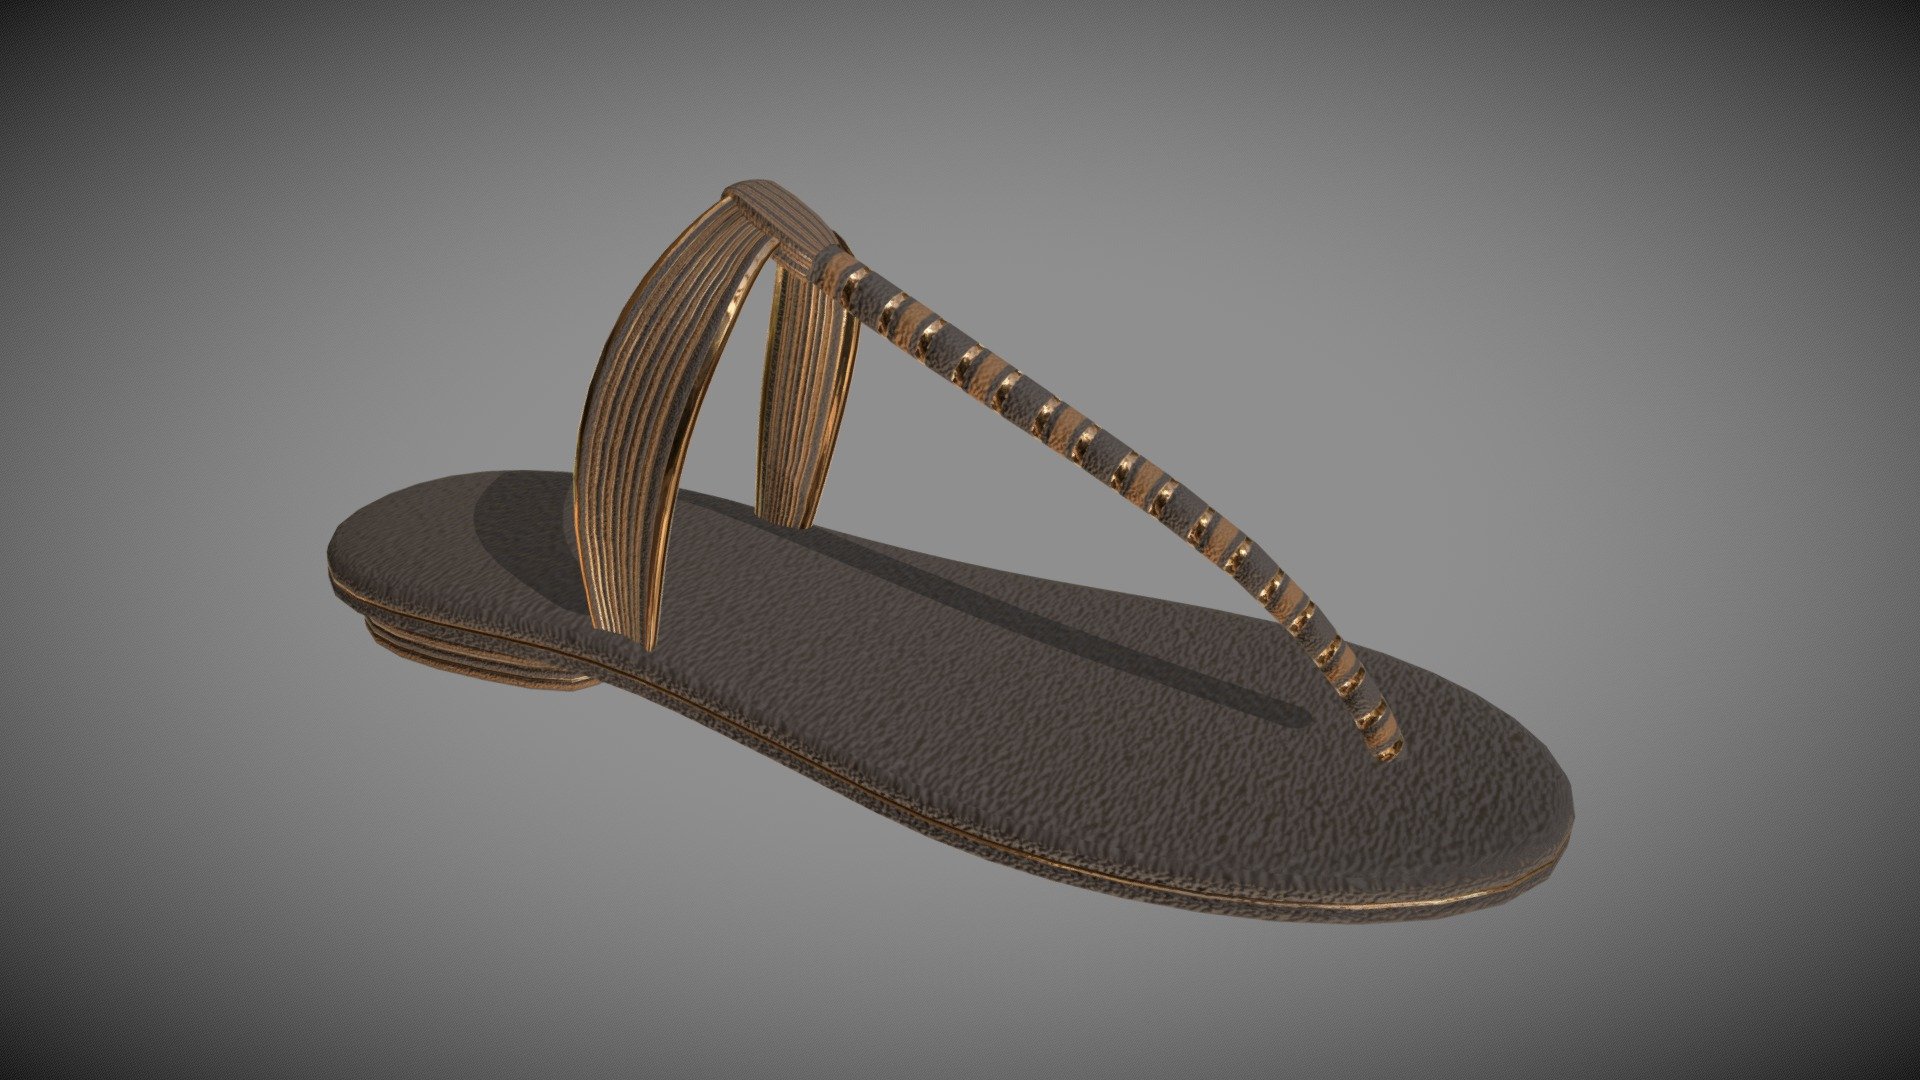 A single simple sandal, based on ancient Egyptian sandals 3d model